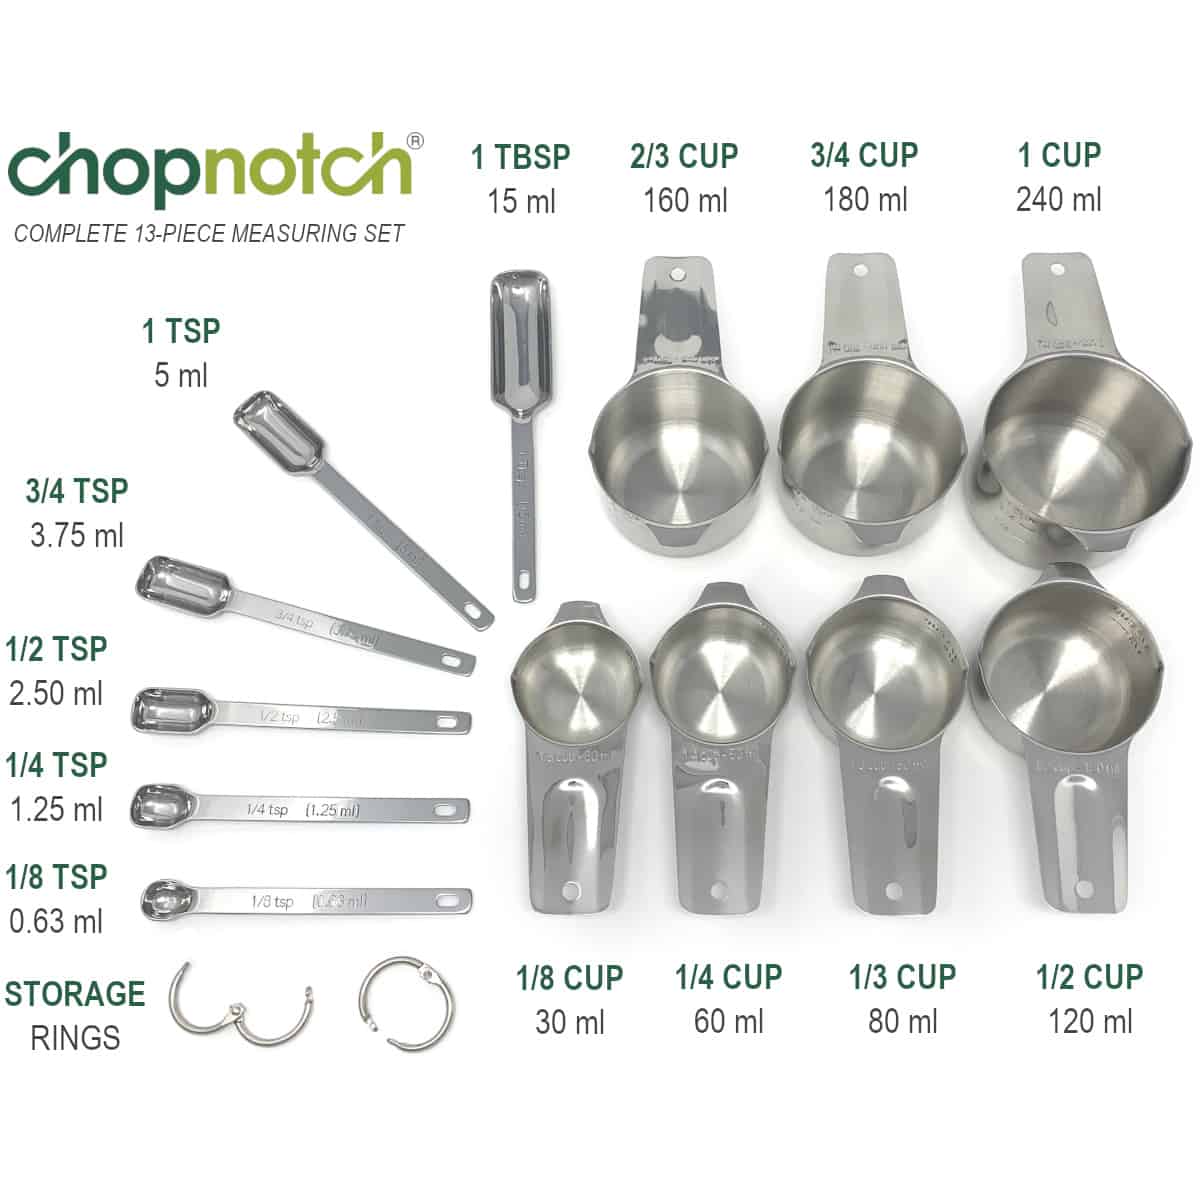 The complete Chopnotch measuring set laid out showing the size of each piece.